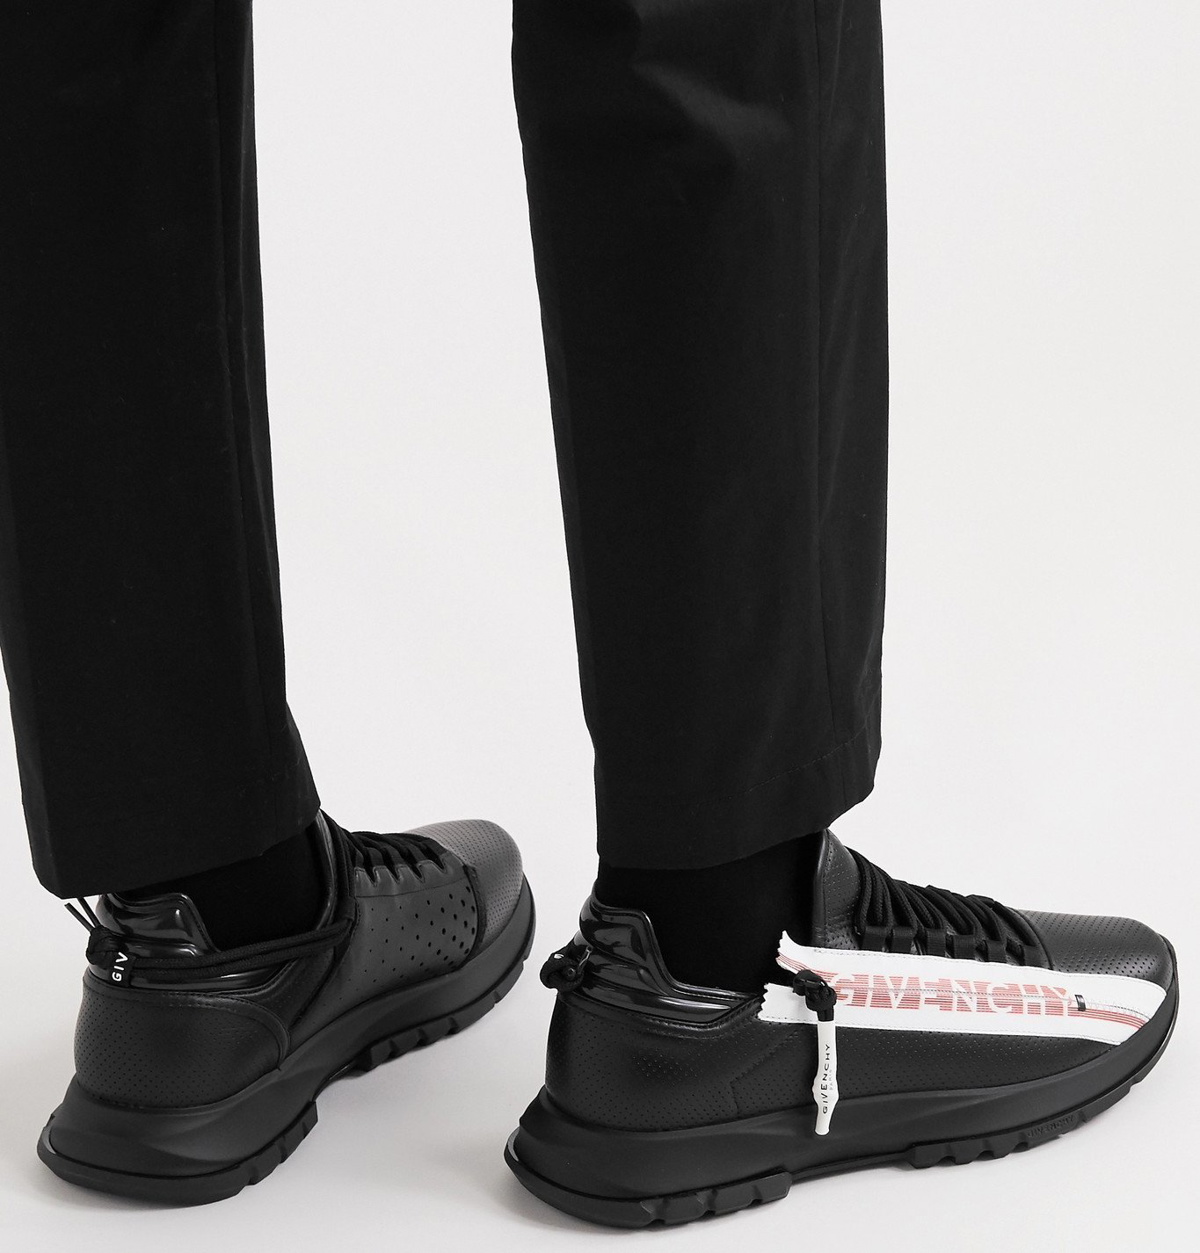 GIVENCHY - Spectre Perforated Leather Sneakers - Black Givenchy